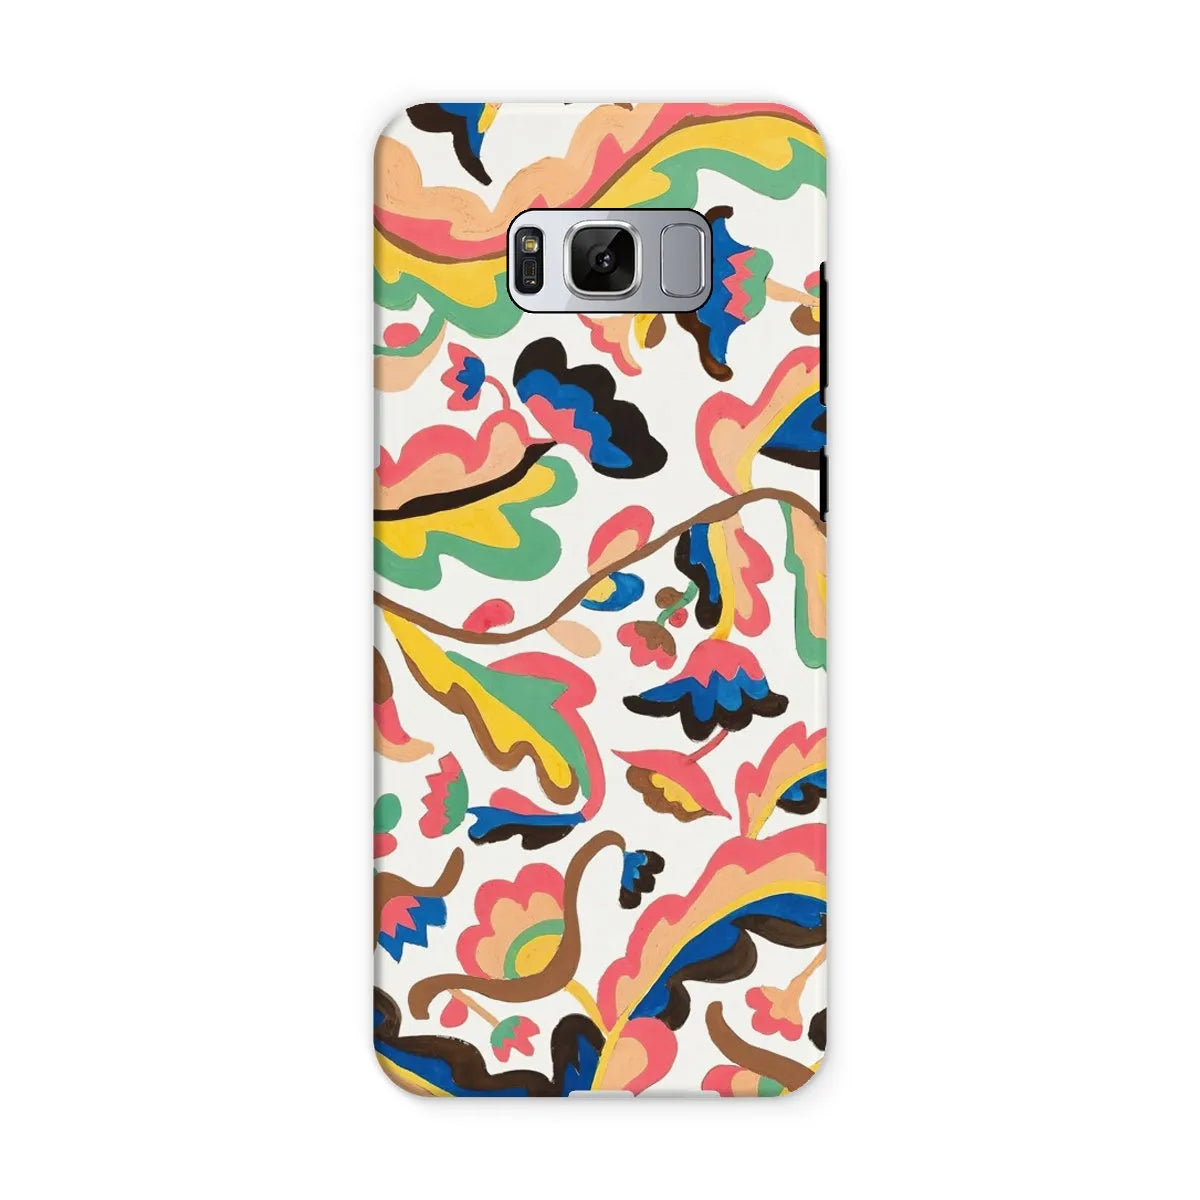 Colcha Floral Aesthetic Pattern Phone Case - Etna Wiswall - Samsung Galaxy S8 / Matte - Mobile Phone Cases - Aesthetic